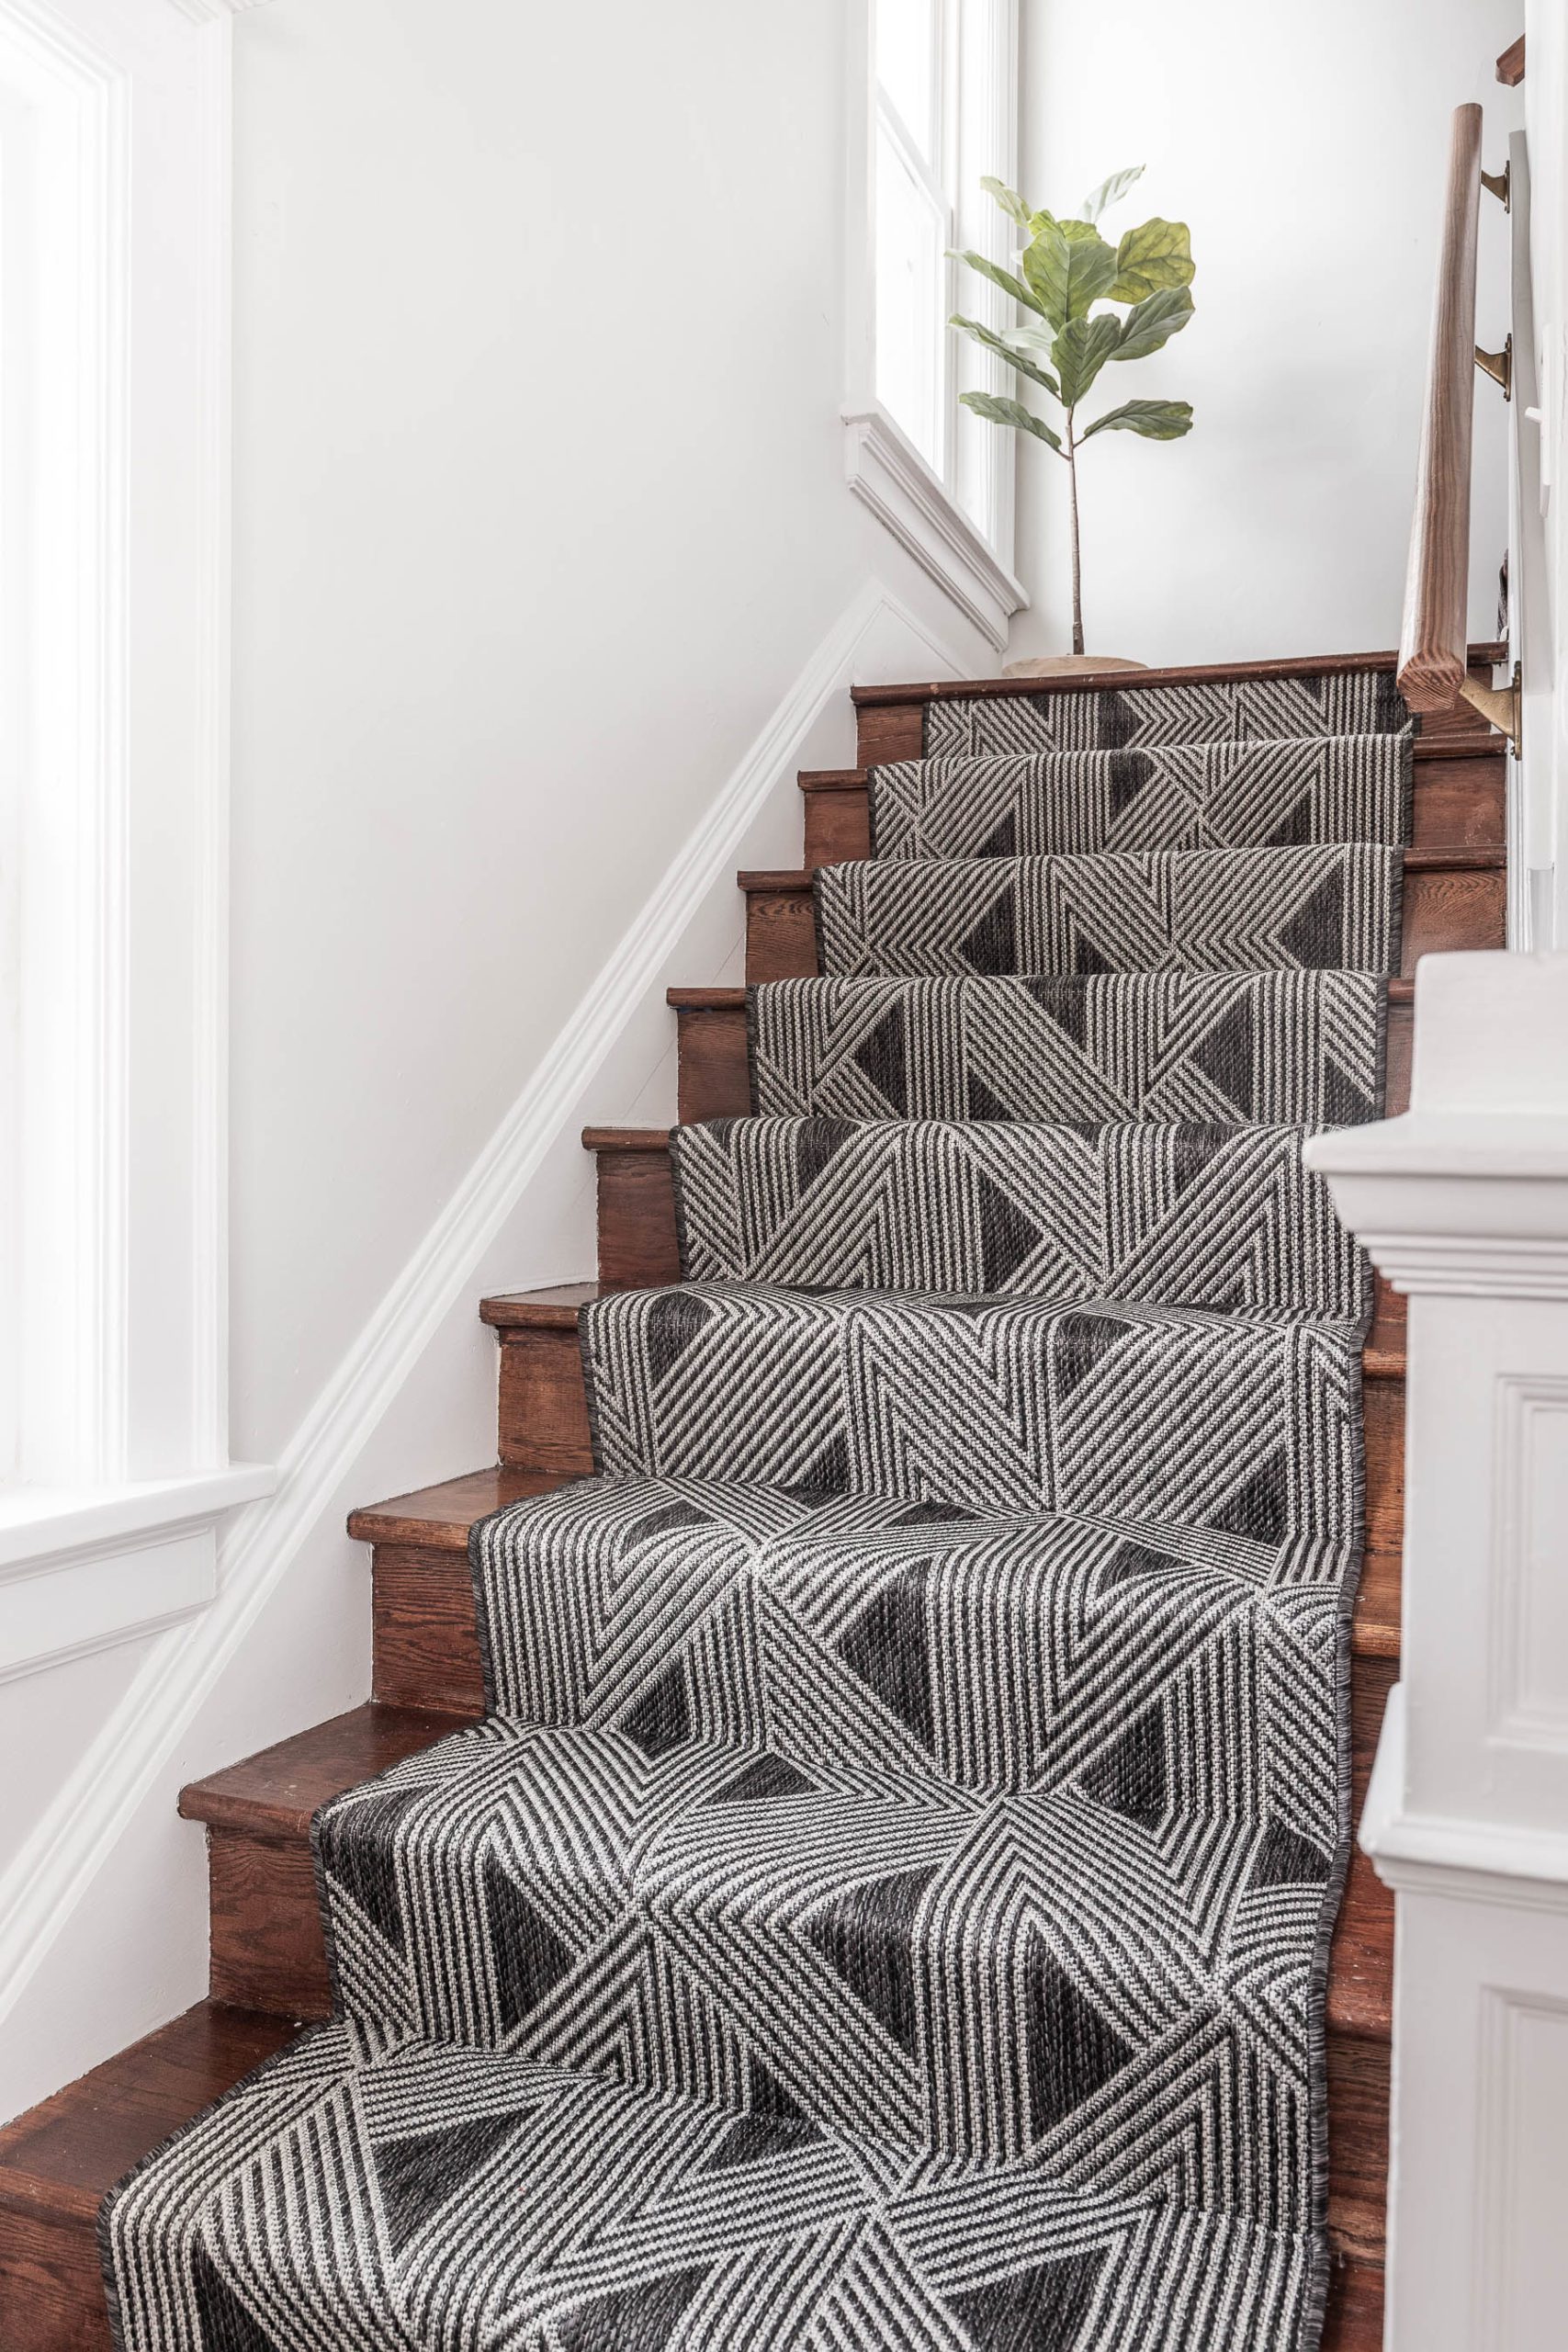 How to Install a Stair Runner | DIY